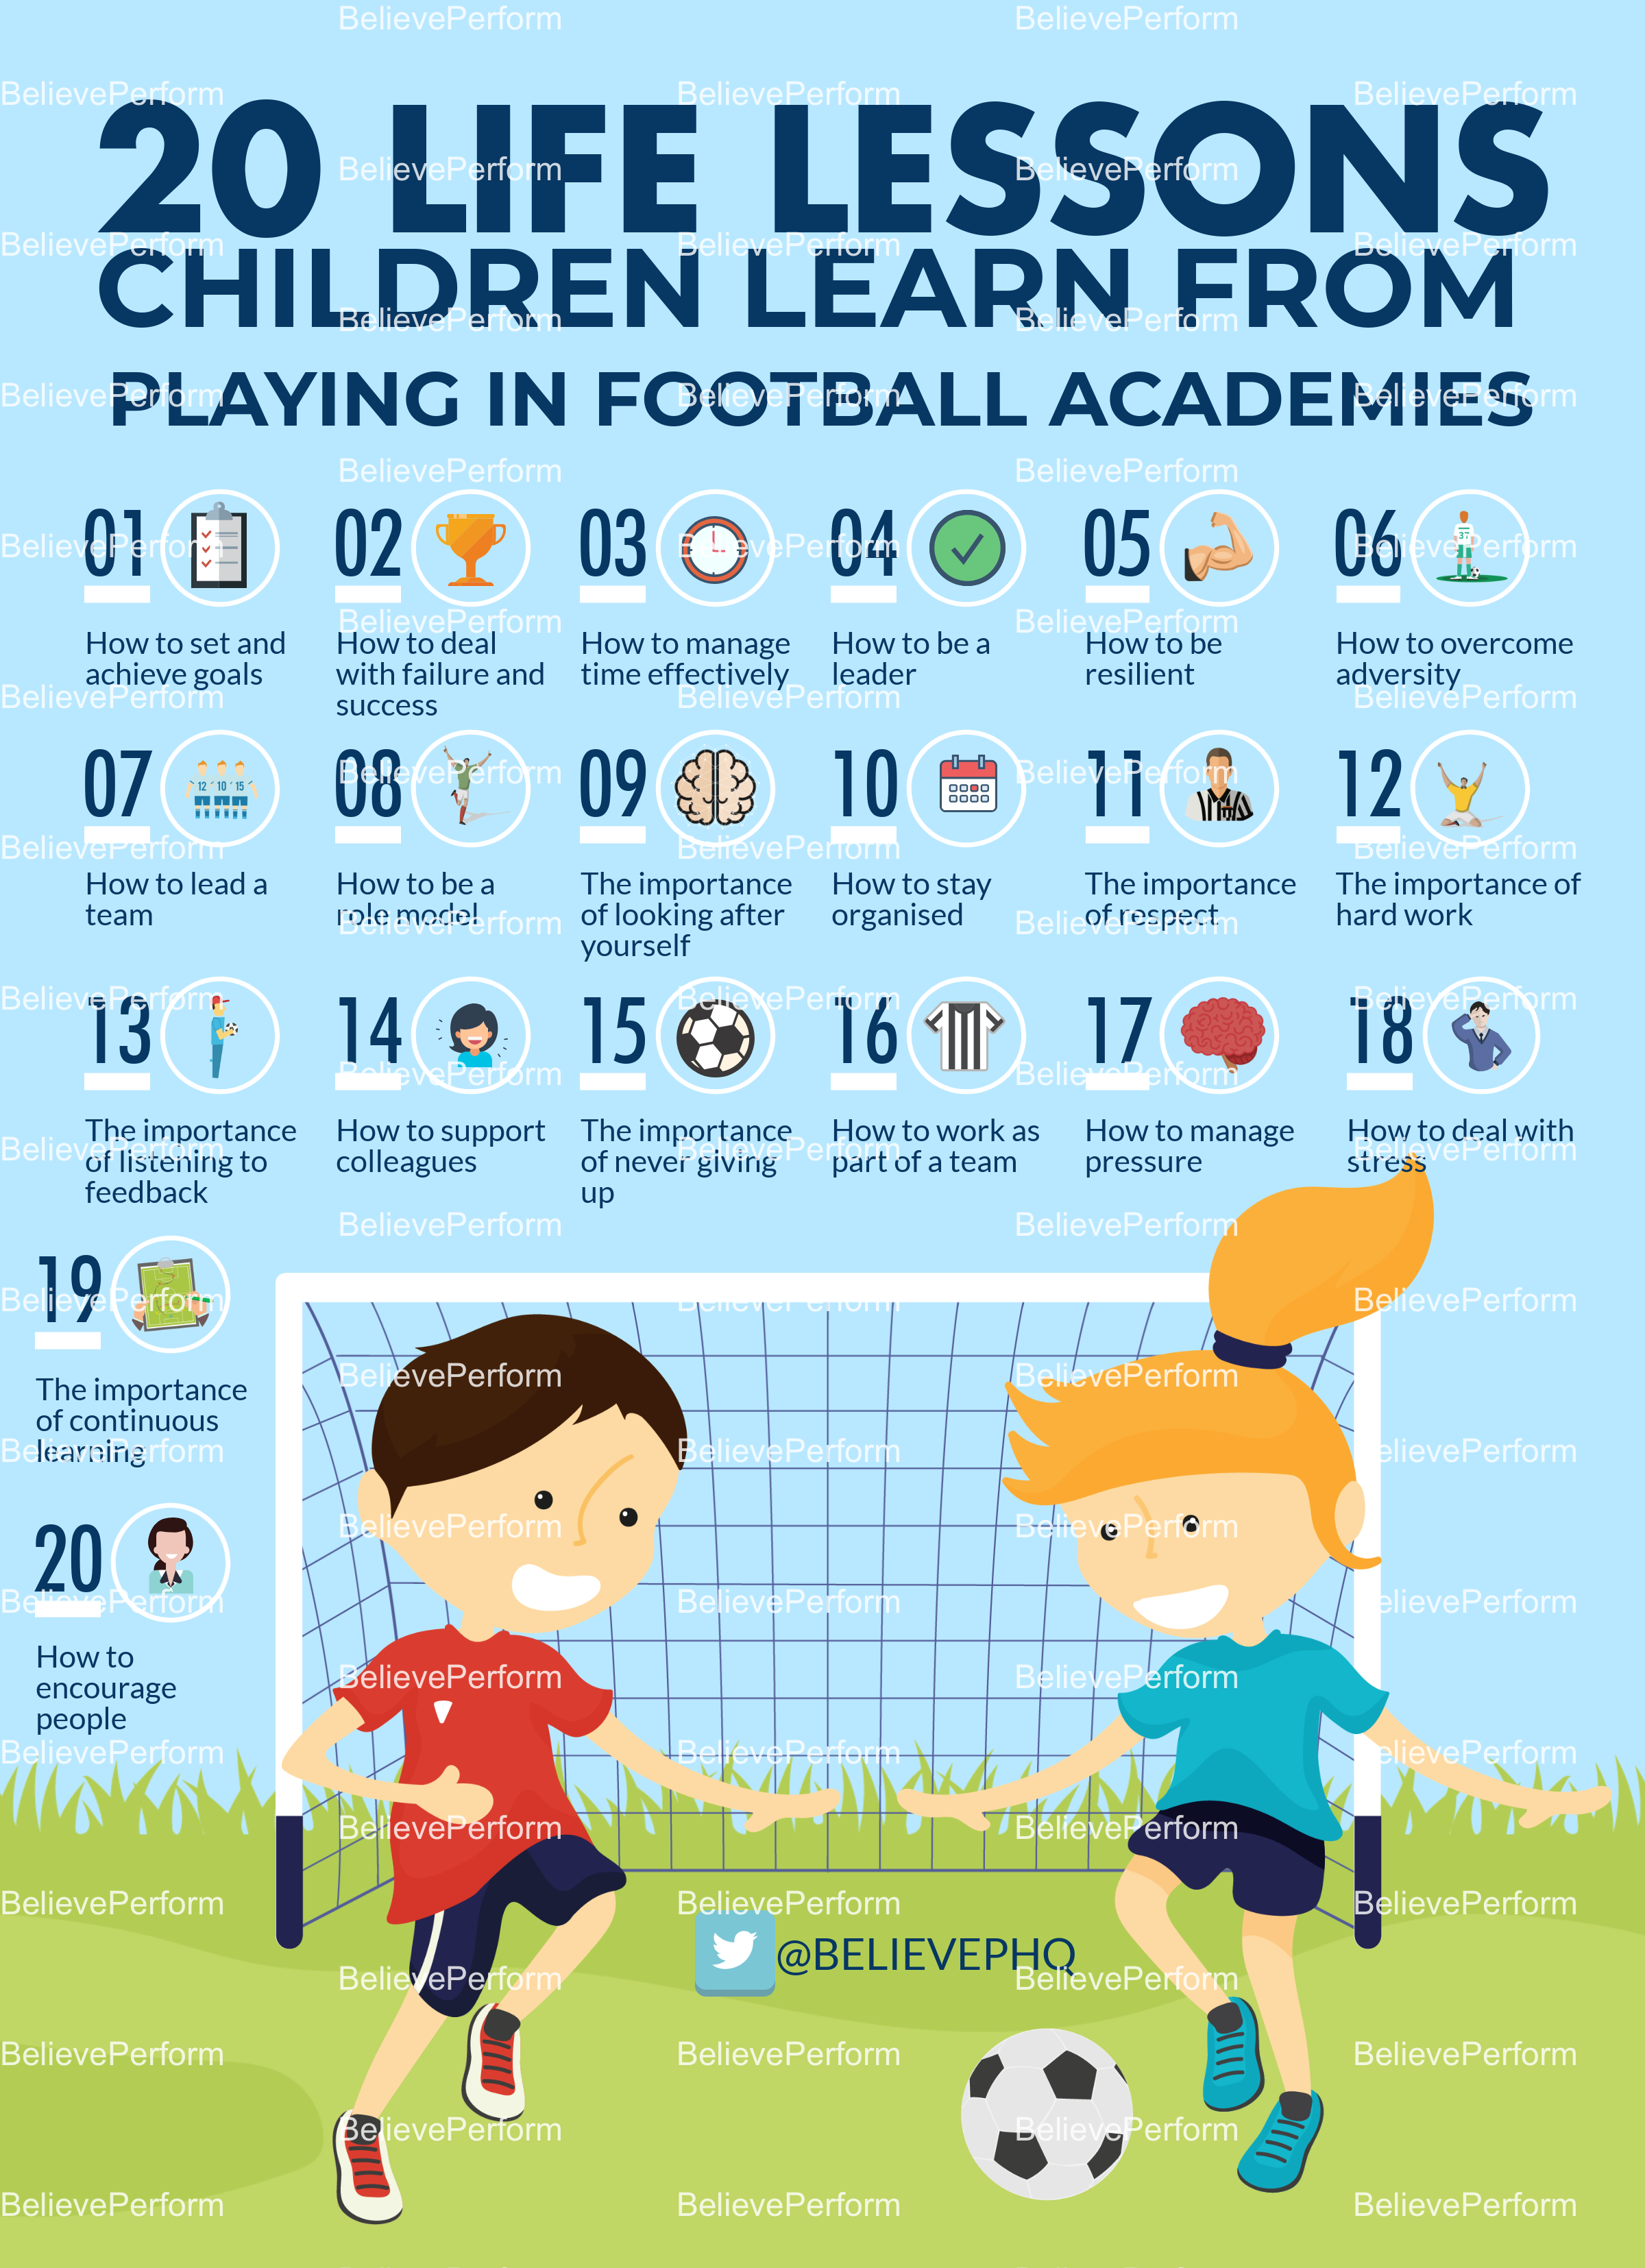 20 life lessons children can learn from playing in football academies - BelievePerform